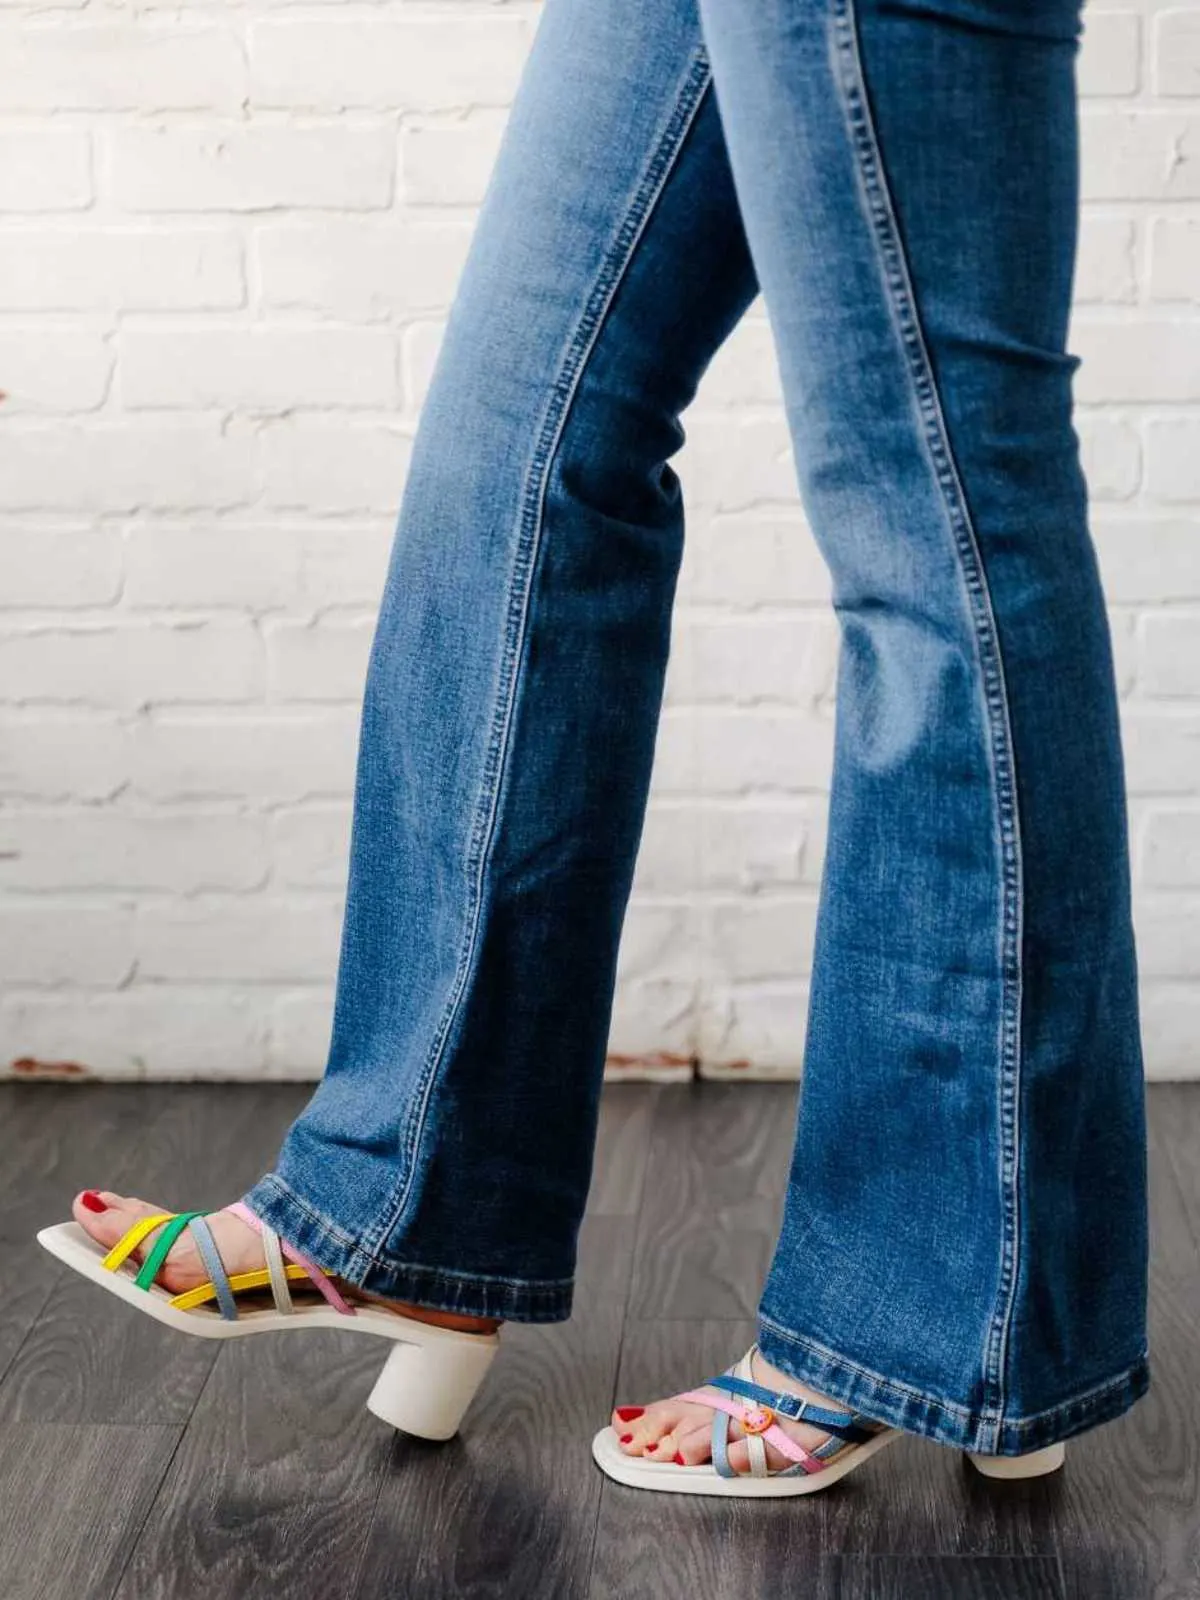 Cropped view of woman's legs wearing block heel sandals with full length blue flare jeans.